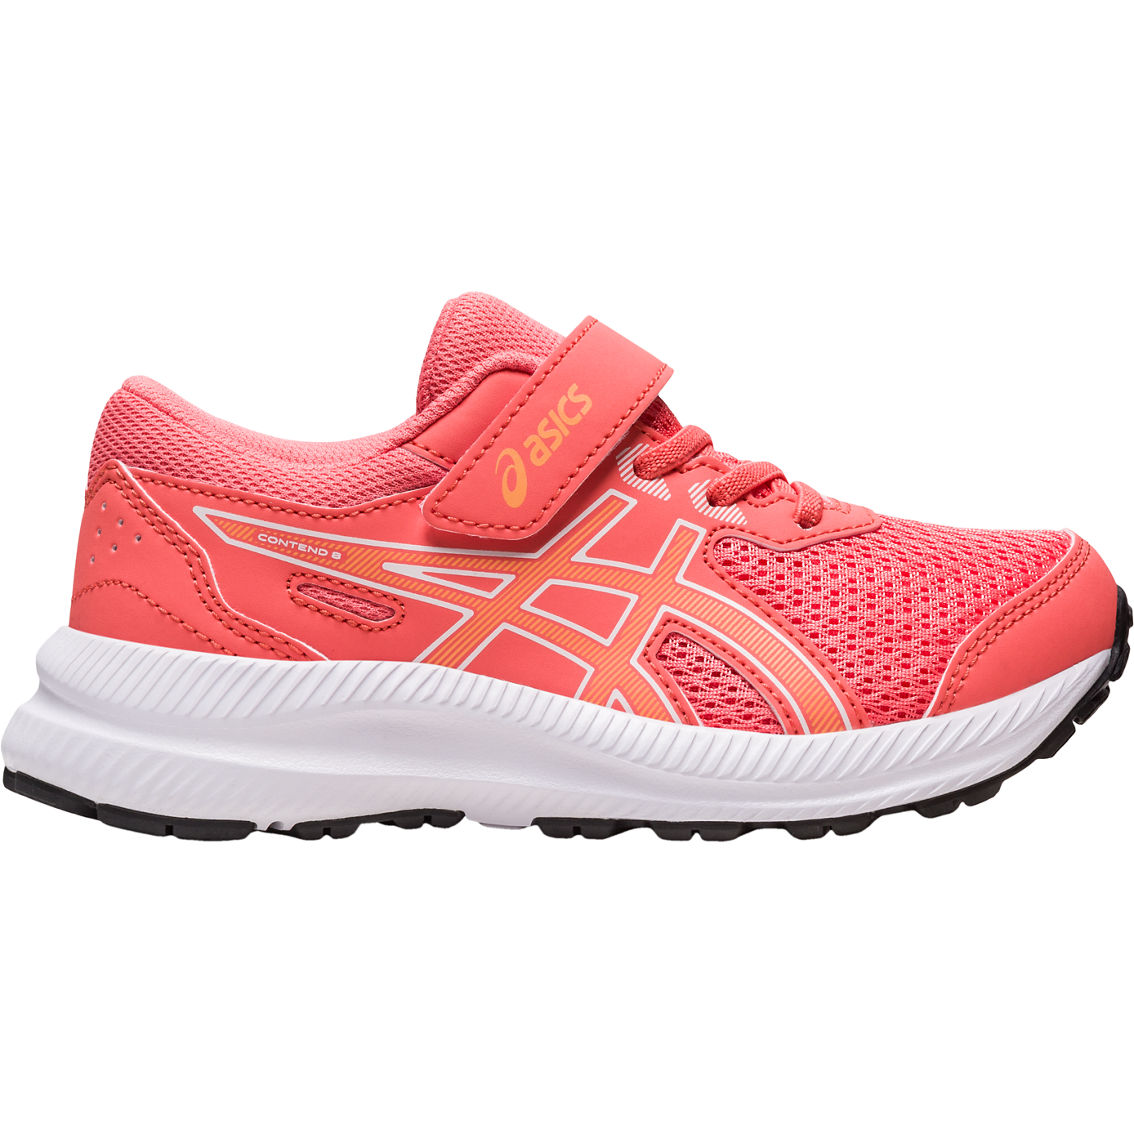 ASICS Preschool Girl's Contend 8 Shoes - Image 2 of 7